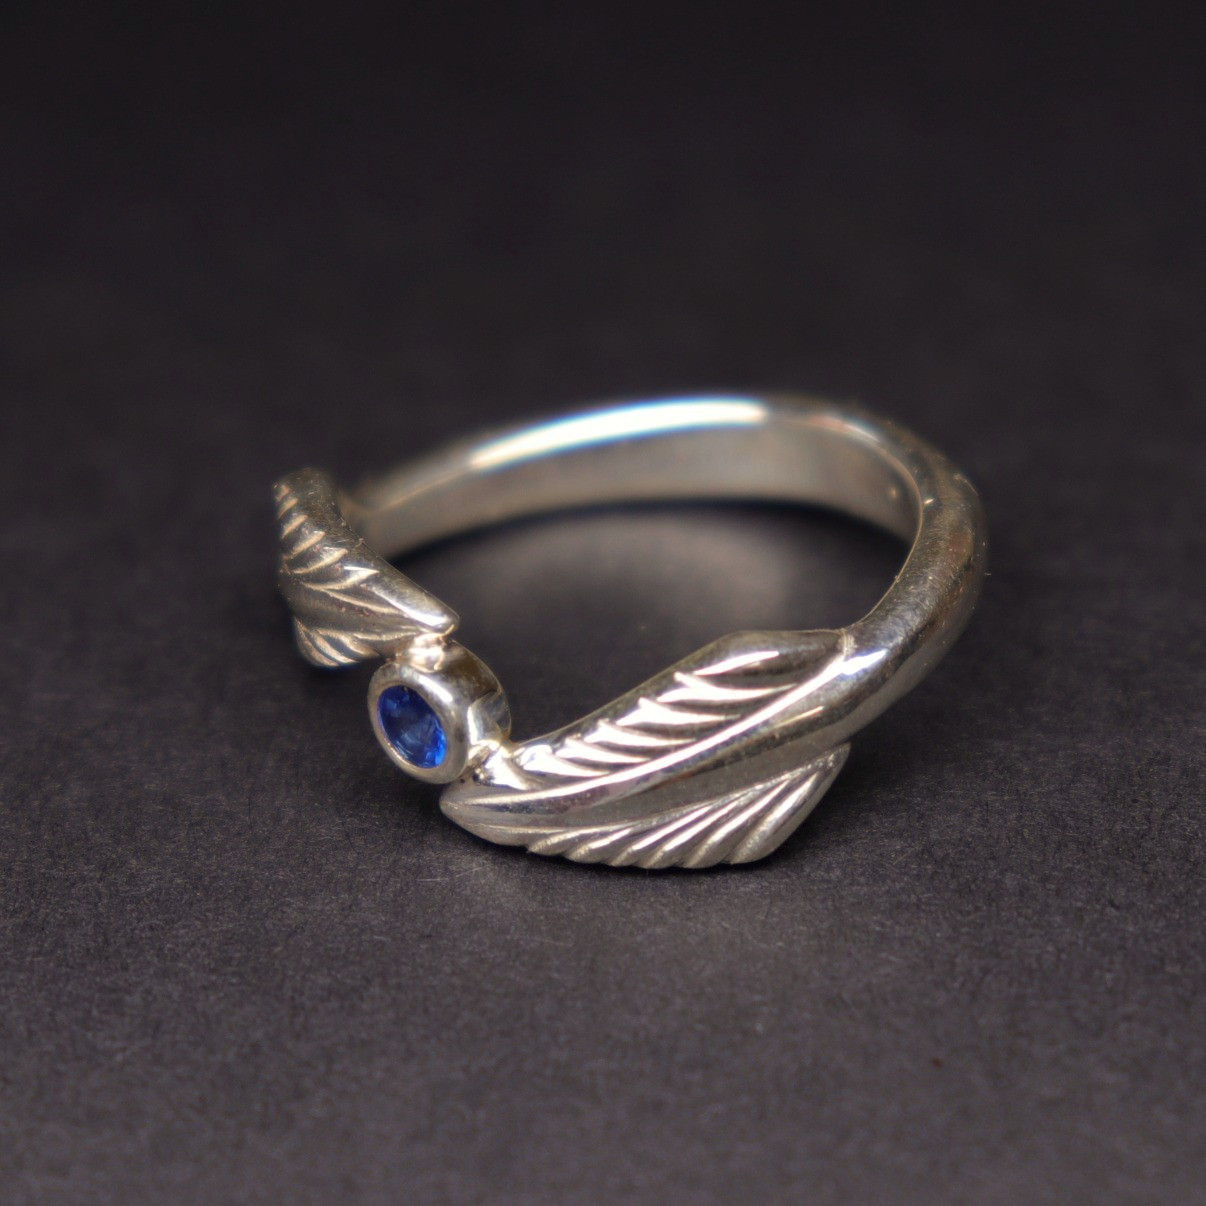 Rachis Ring - Sapphire - Boutee